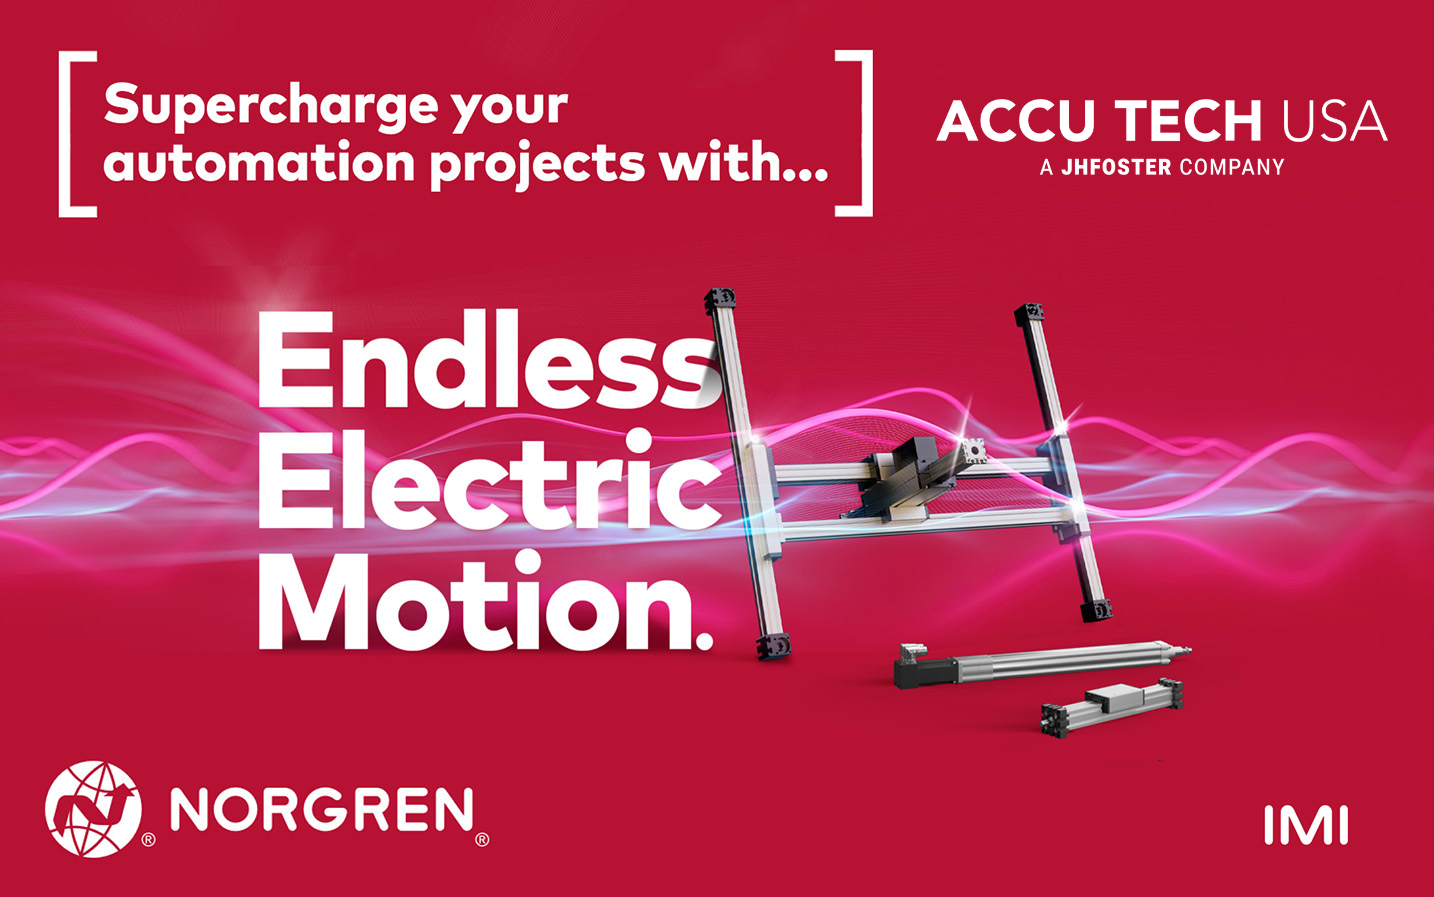 Accu Tech USA and Norgren: Pioneering the future of electric motion